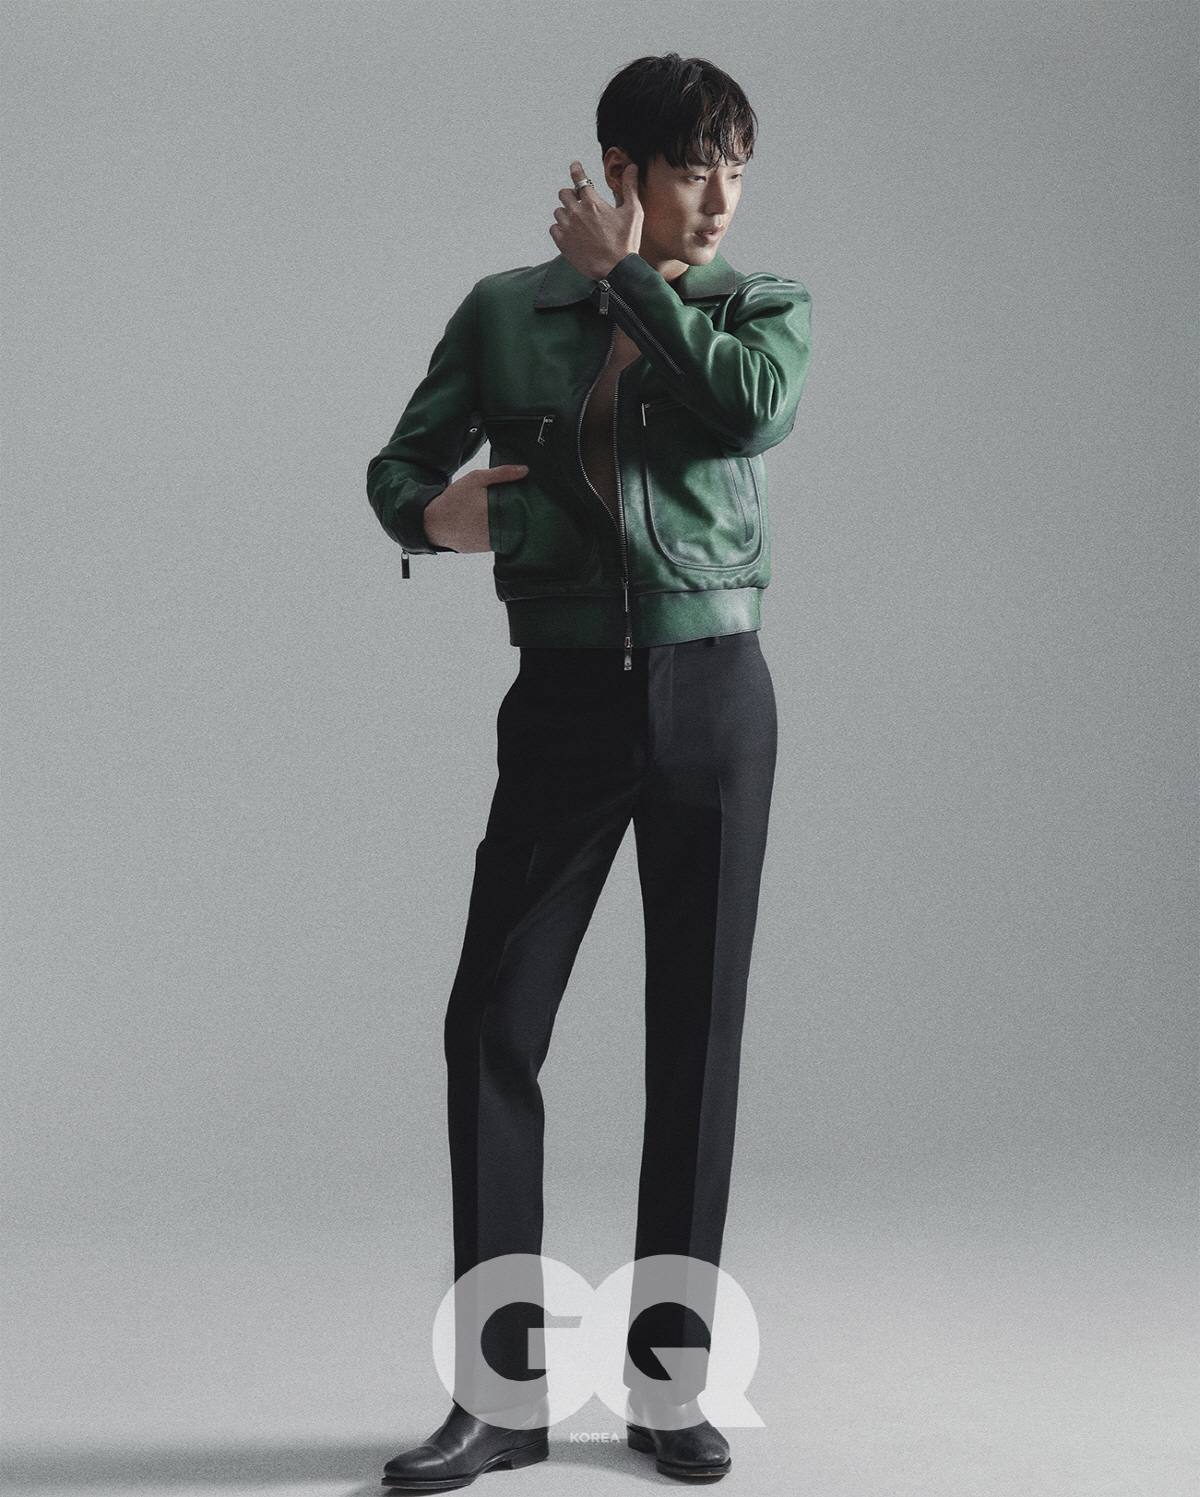 A picture of Lee Tae-hwans understated sexy was released.Actor Lee Tae-hwans picture, which recently showed an extraordinary transformation of acting through JTBCs Elegant Friends, was released through the mens magazine GQ KOREA.Lee Tae-hwan in the public picture captures the eye with superior physical and warm appearance.Leather, denim, white T-shirts, and other styles with their own feelings, perfecting the sexy charm captivated the woman.In an interview with the picture, Lee Tae-hwan said, It was a villain that I would not have a stronger role in the future. I was nervous while shooting, but later I seemed to have put it down completely and postponed it. I recalled.As for the job of Actor, Happiness and pain seem to coexist together.It is really happy to meet with many people and to feel indirectly the feelings that I will not experience for the rest of my life.  When someone sympathizes with the Characters and ambassadors, I am proud when what I wanted to express is delivered to people. In addition, he appeared in SBS entertainment Park Jang Deso and got the nickname love newborn baby. I do not think it is a good style to actively love, but I want to try love straight before the end of my 20s.I conveyed my honest heart.Lee Tae-hwan made a special appearance as a golf instructor in the JTBC gilt drama Elegant Friends. He made a strong impression on viewers by performing a modifier called Perfect Billon.Lee Tae-hwan, who was called end stiller by sweeping the ending at the beginning of the play, left the death of Jugangsan as a mystery axis and played a big role more than a special appearance.Meanwhile, Lee Tae-hwans more detailed interviews and pictures can be found in the September issue of GQ KOREA.